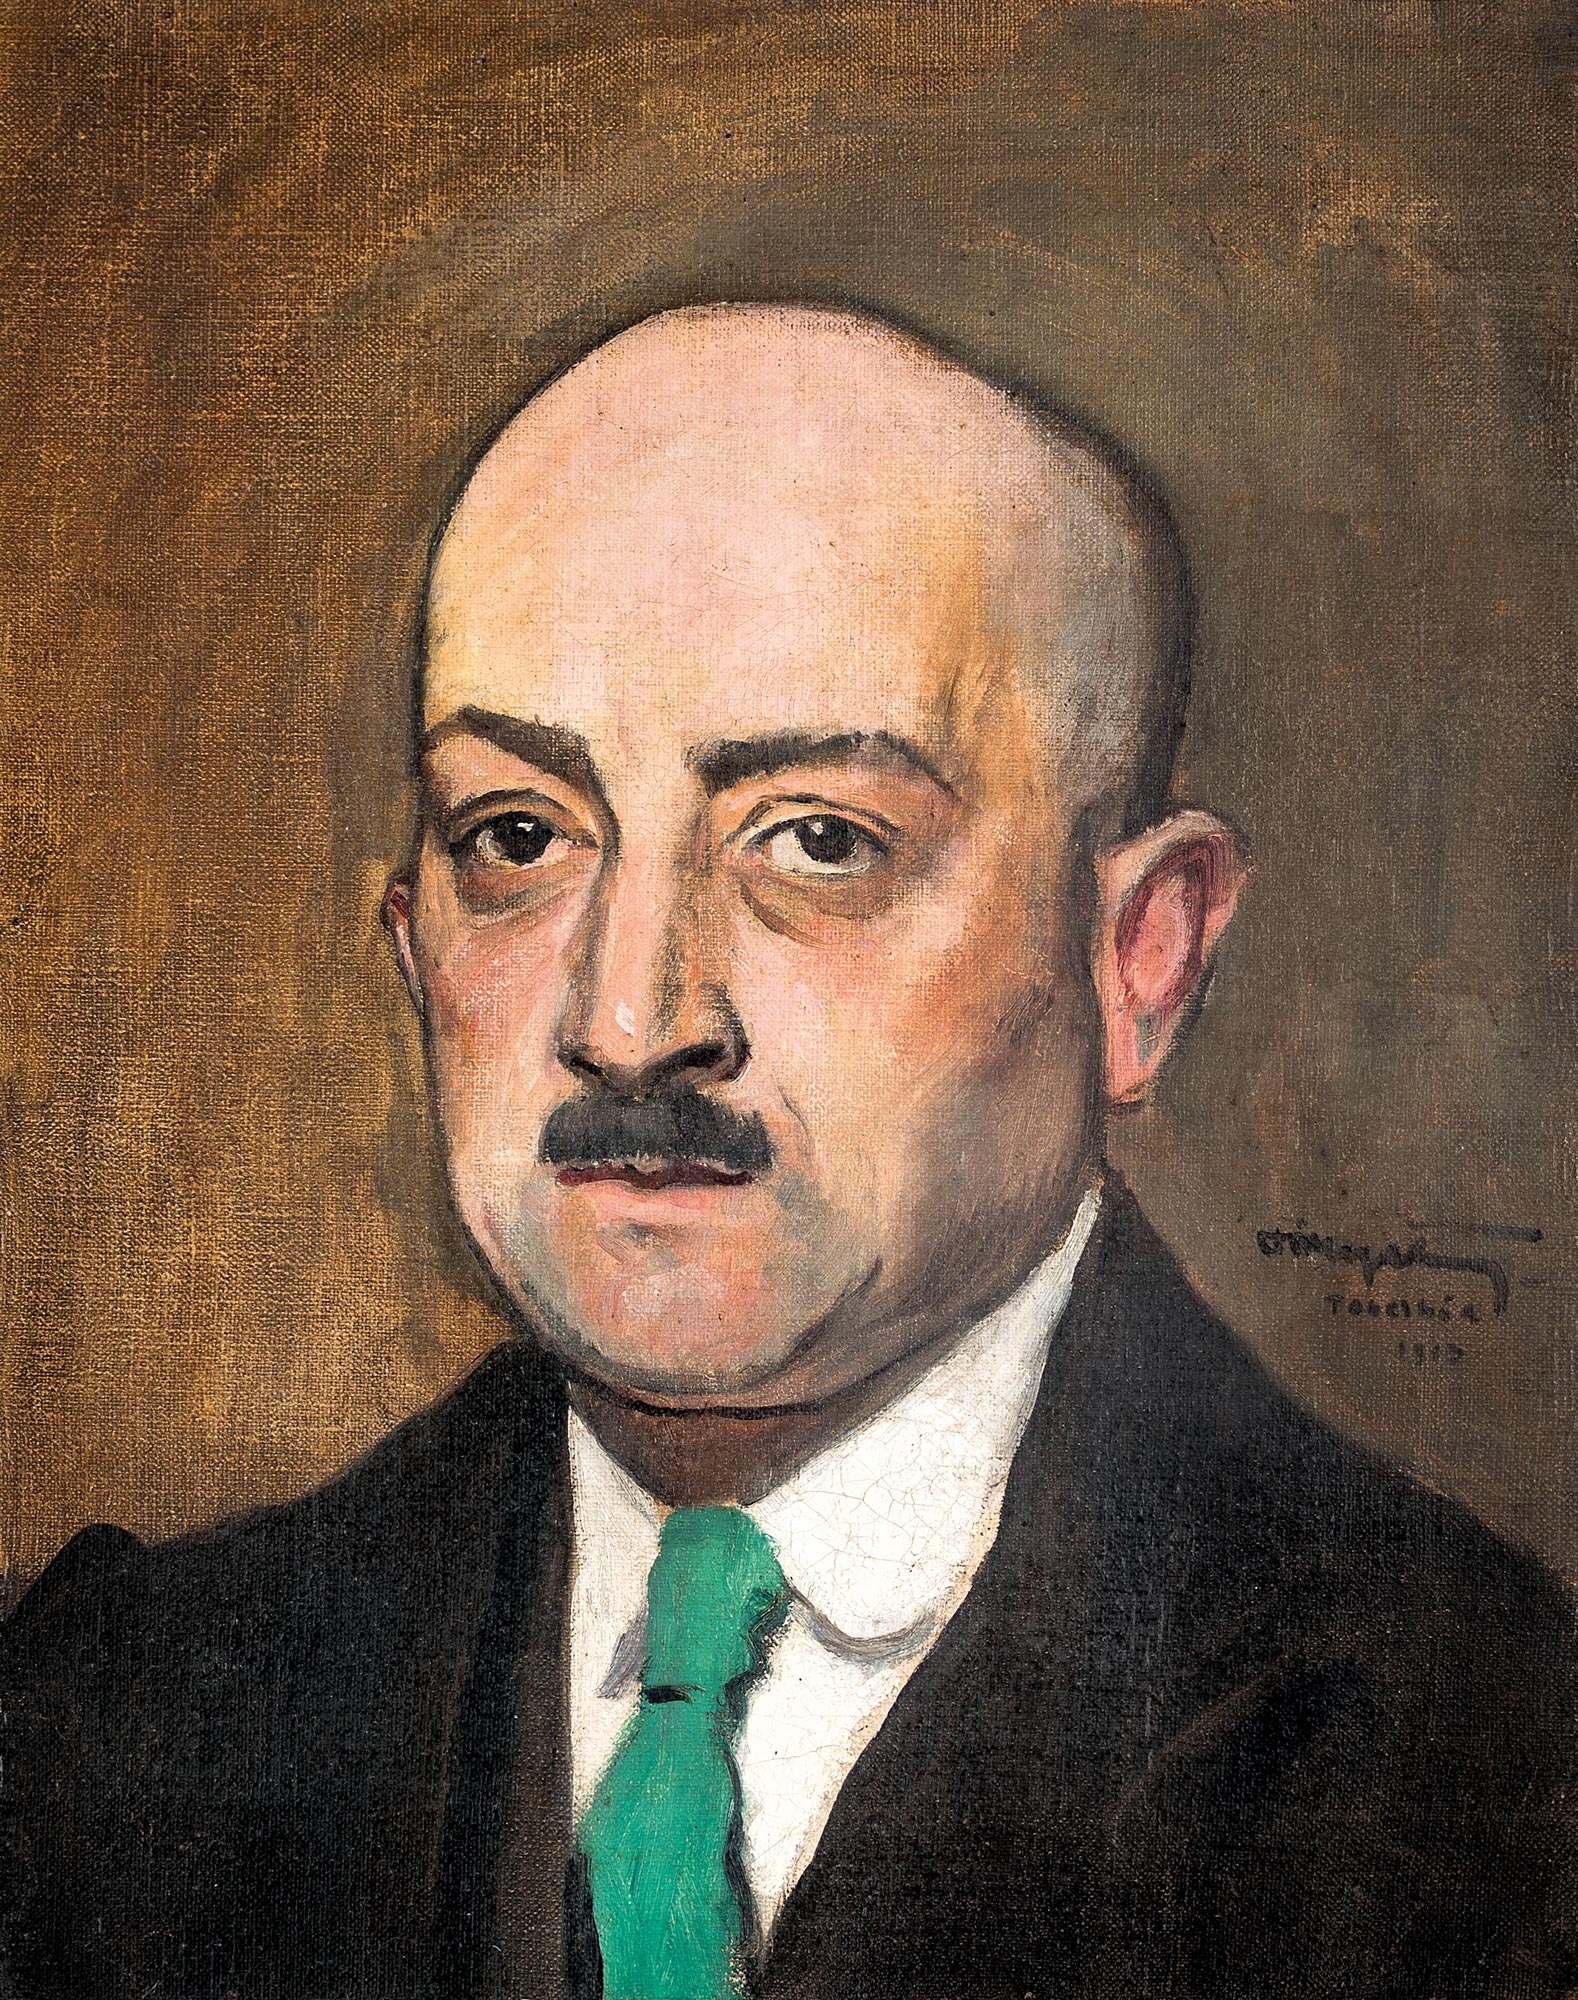 Portrait of a man in a green tie by Tibor Polya, 1913